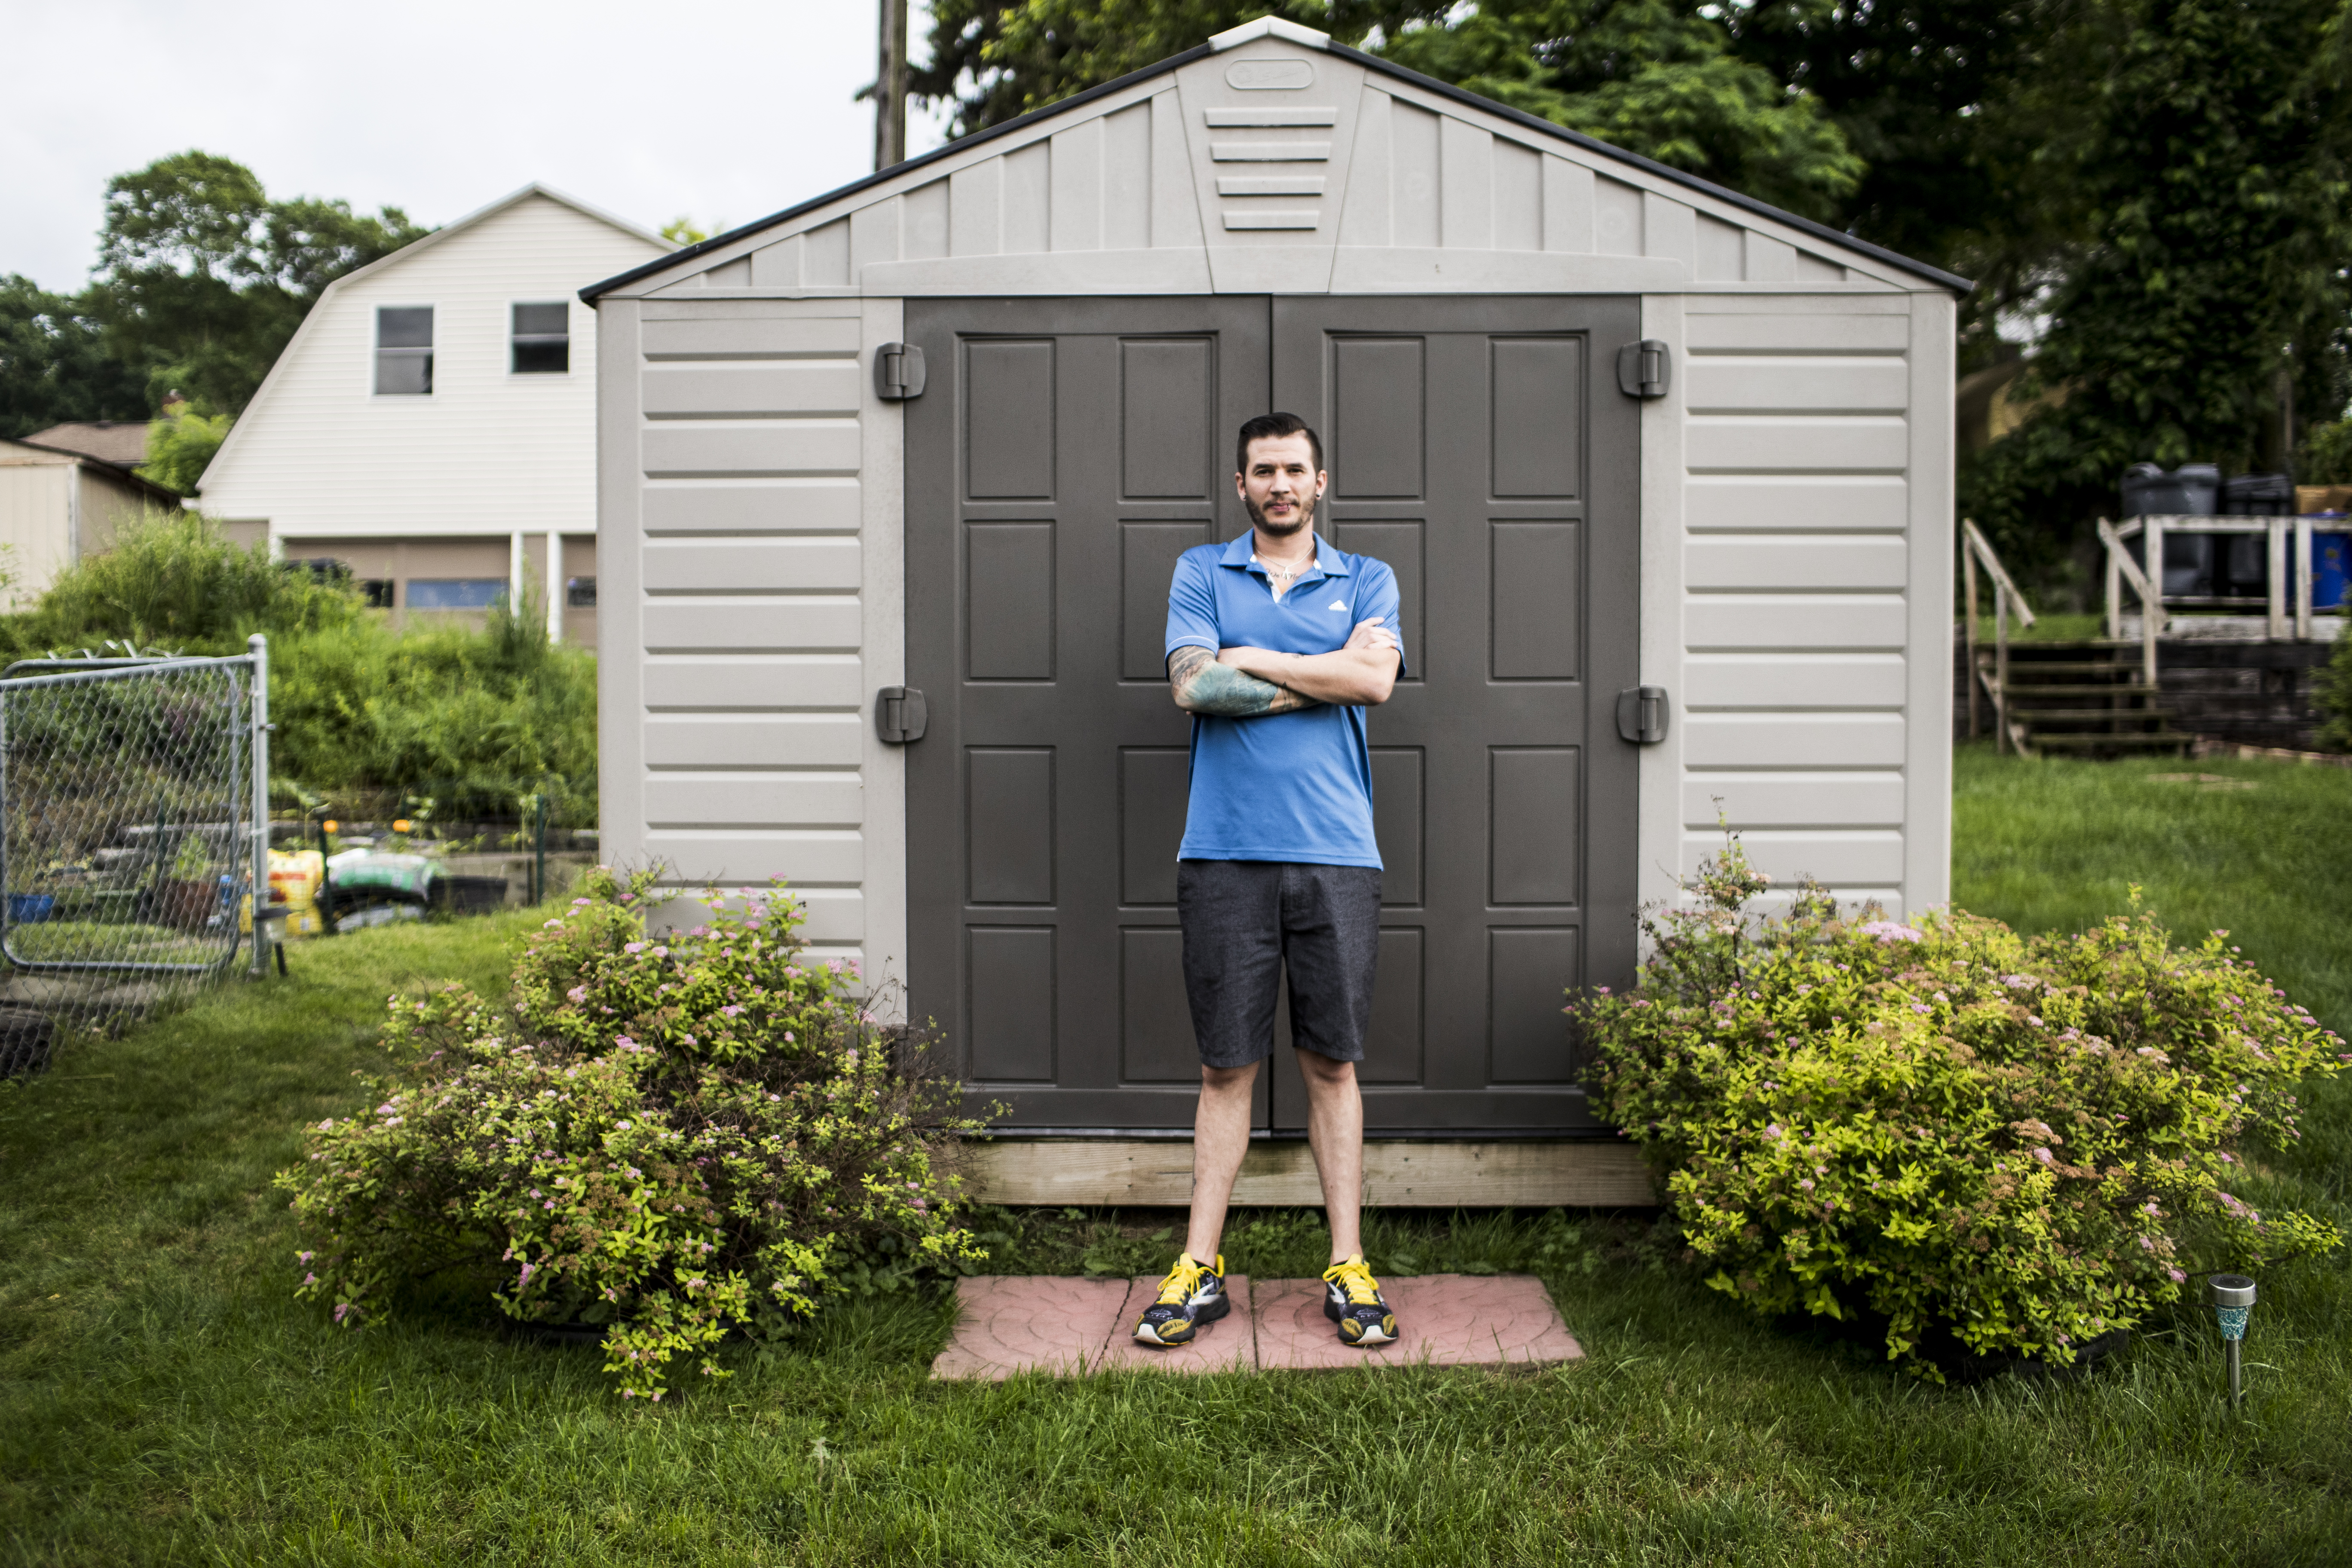 Josh Sinisi at his Pittsburgh, Pa. home. June 14, 2021  Sean Simmers |ssimmers@pennlive.com